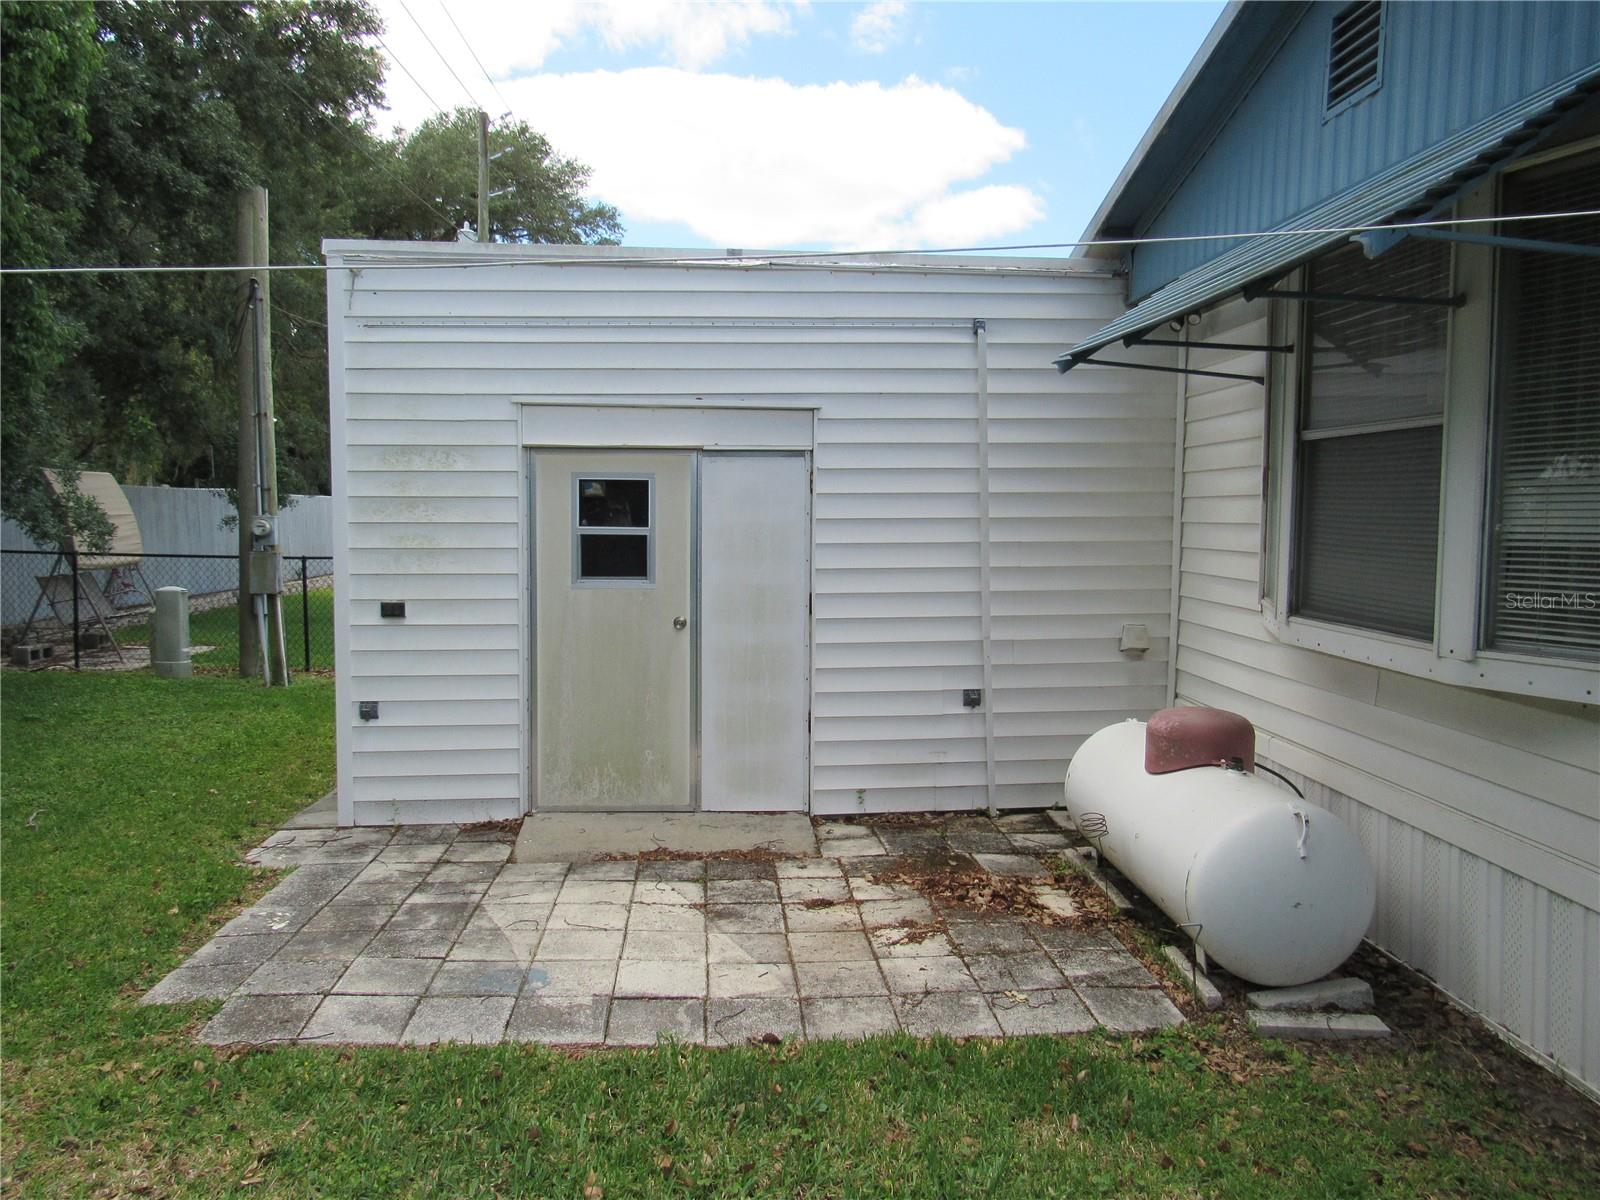 Paver patio & attached utility room with double door for golf cart parking.